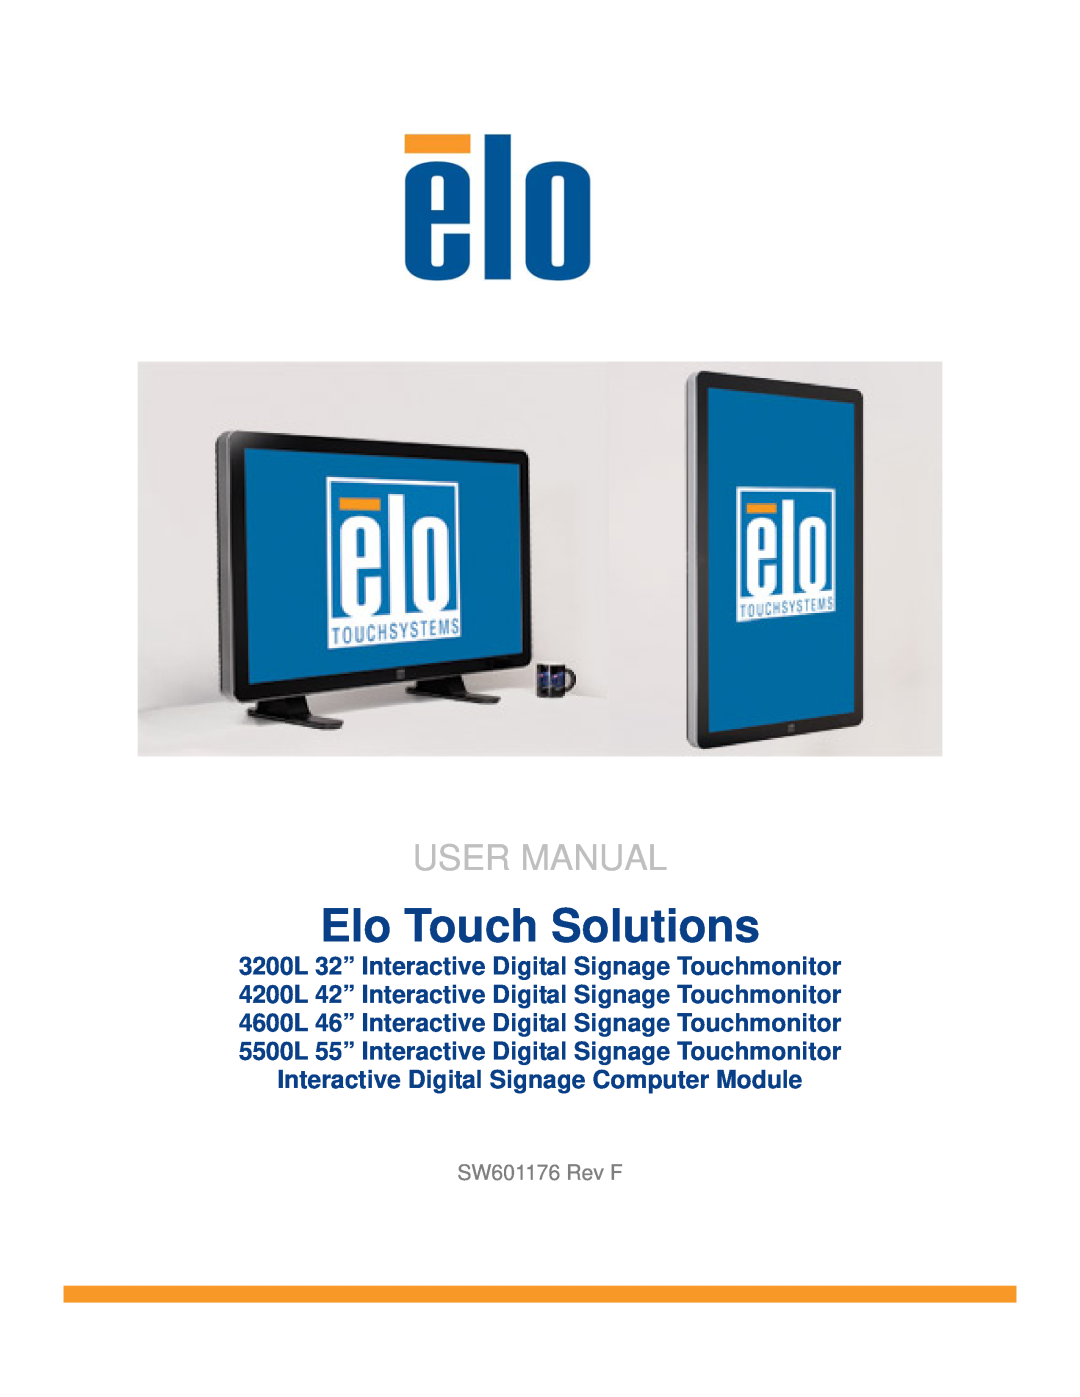 Elo TouchSystems 5500L user manual Elo Touch Solutions, User Manual, 3200L 32” Interactive Digital Signage Touchmonitor 